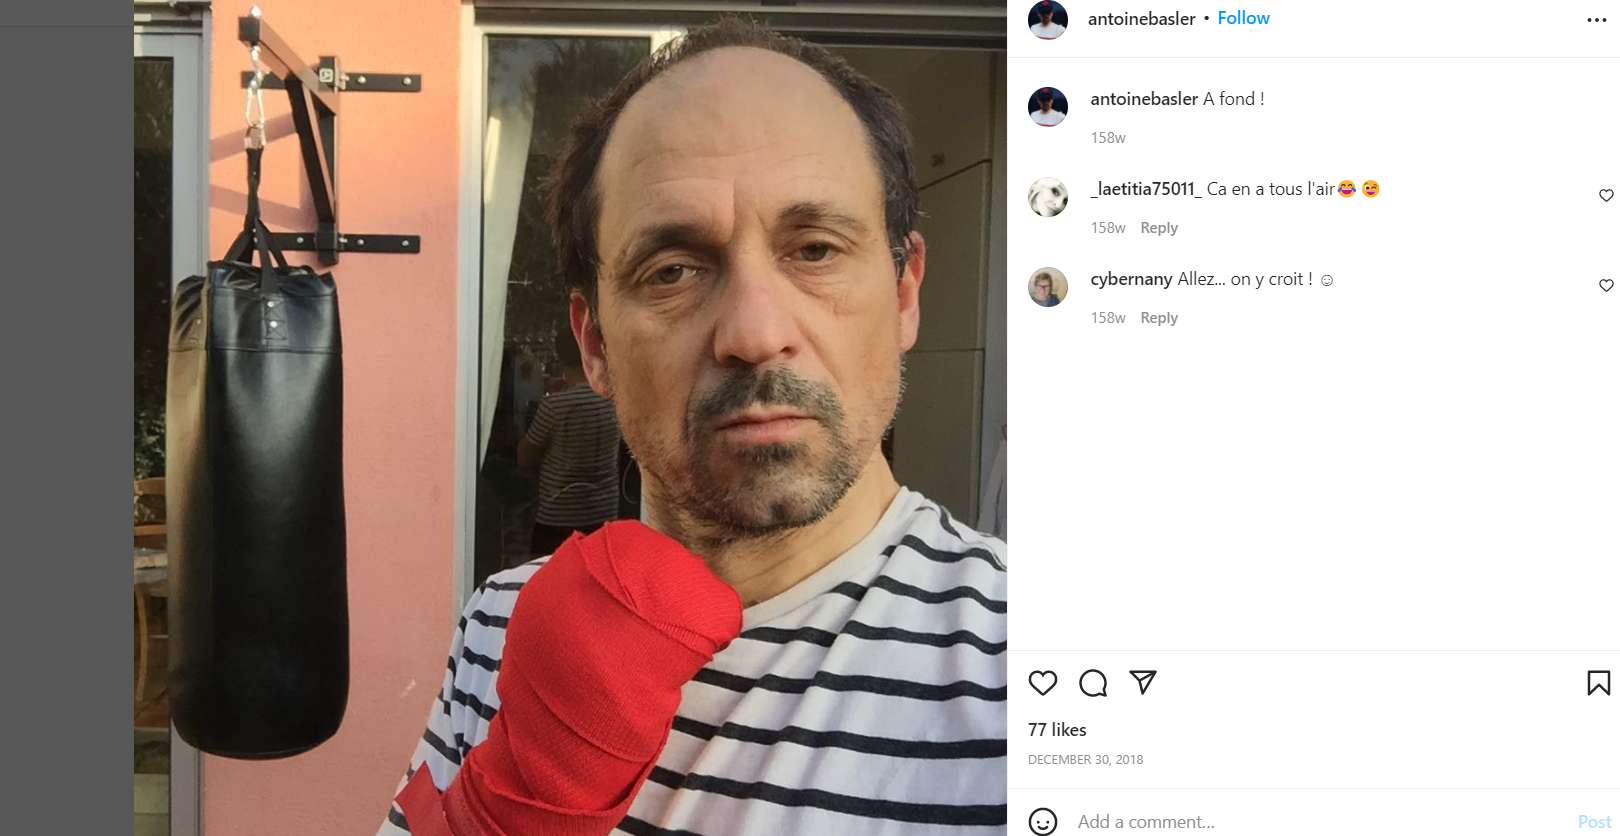 Antoine Basler posted about boxing on his Instagram